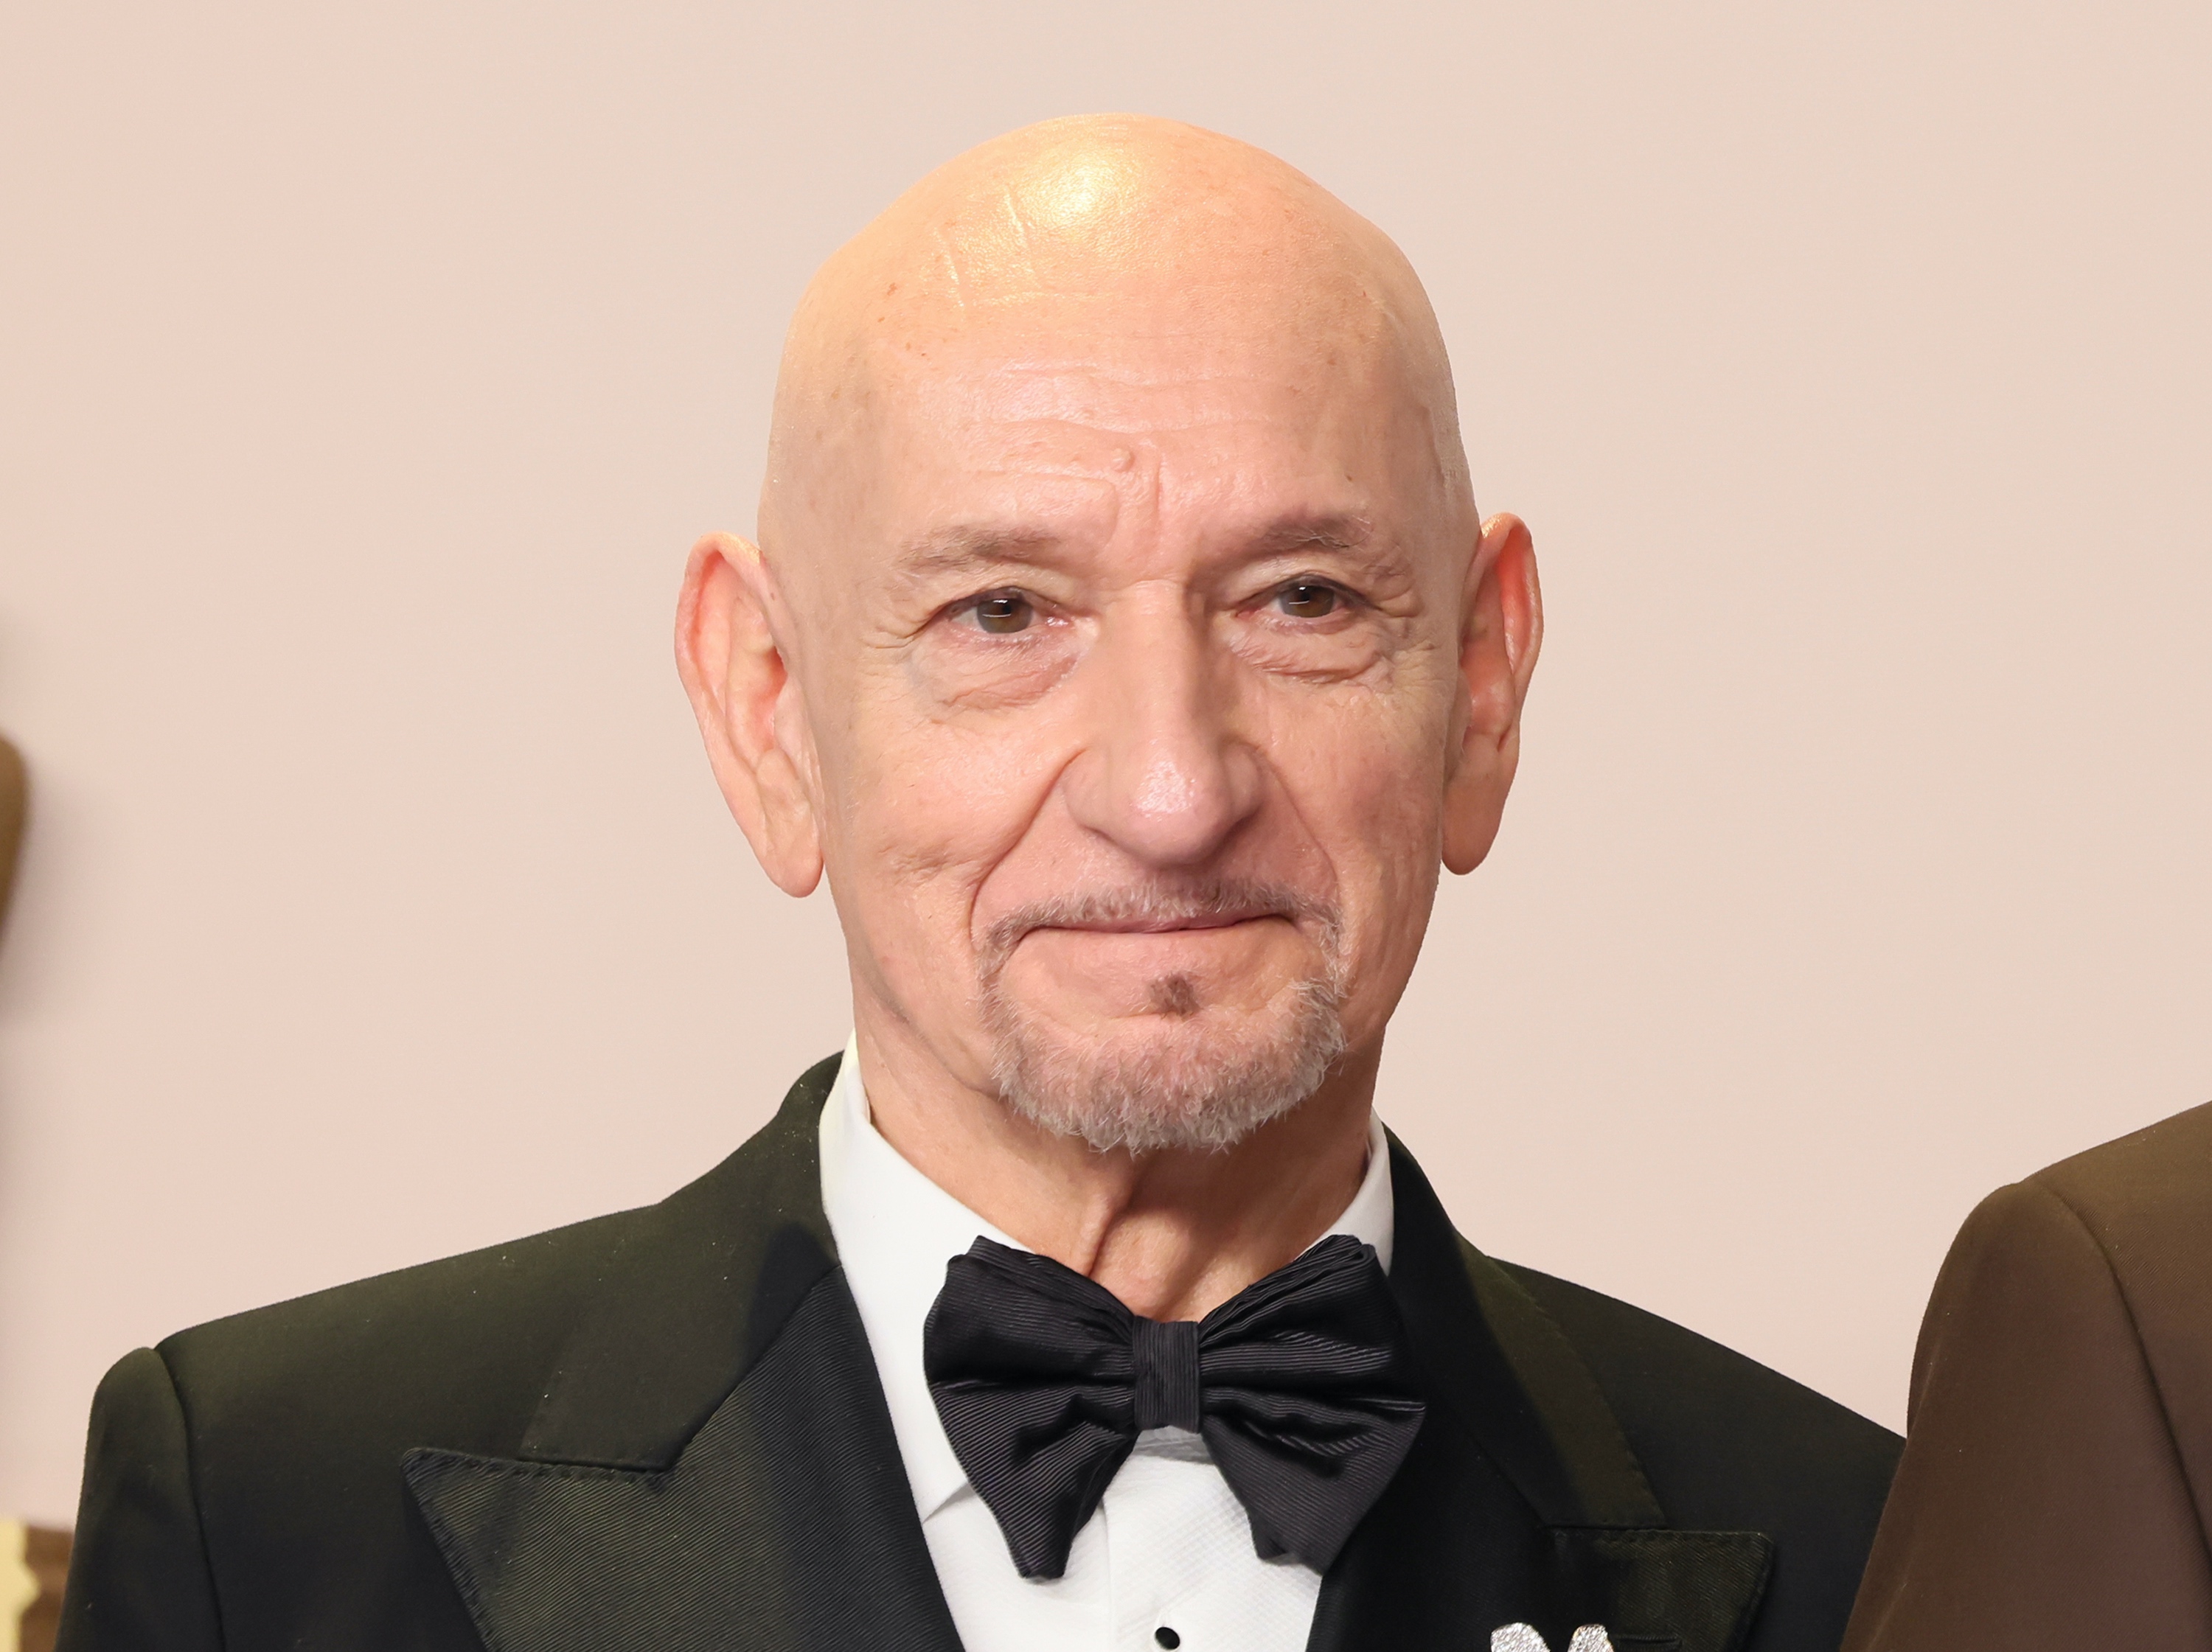 HOLLYWOOD, CALIFORNIA - MARCH 10: Ben Kingsley poses in the press room during the 96th Annual Academy Awards at Ovation Hollywood on March 10, 2024 in Hollywood, California. (Photo by Rodin Eckenroth/Getty Images)